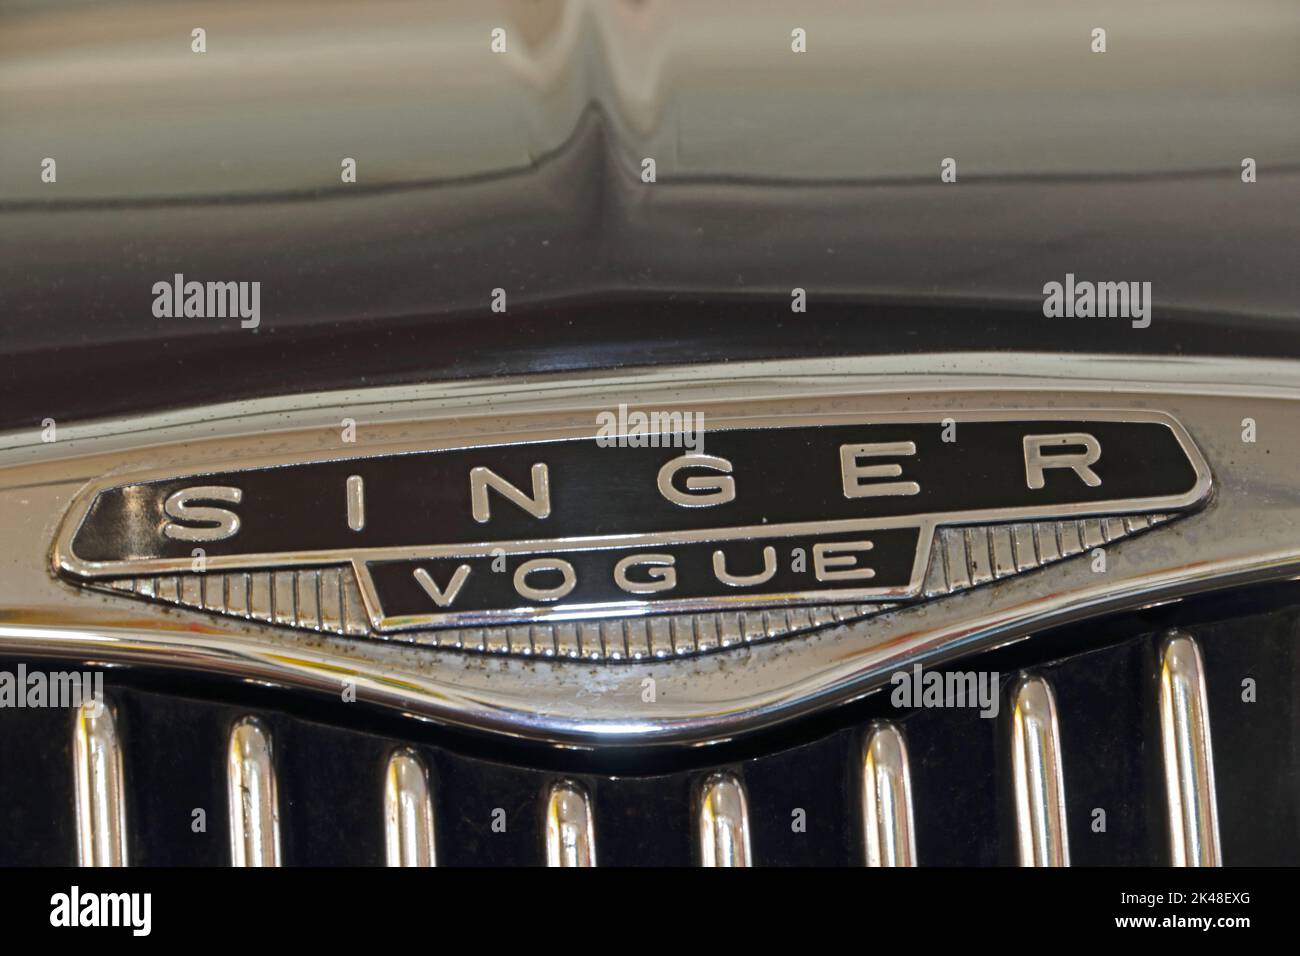 Singer Vogue badge on top of radiator grille Stock Photo